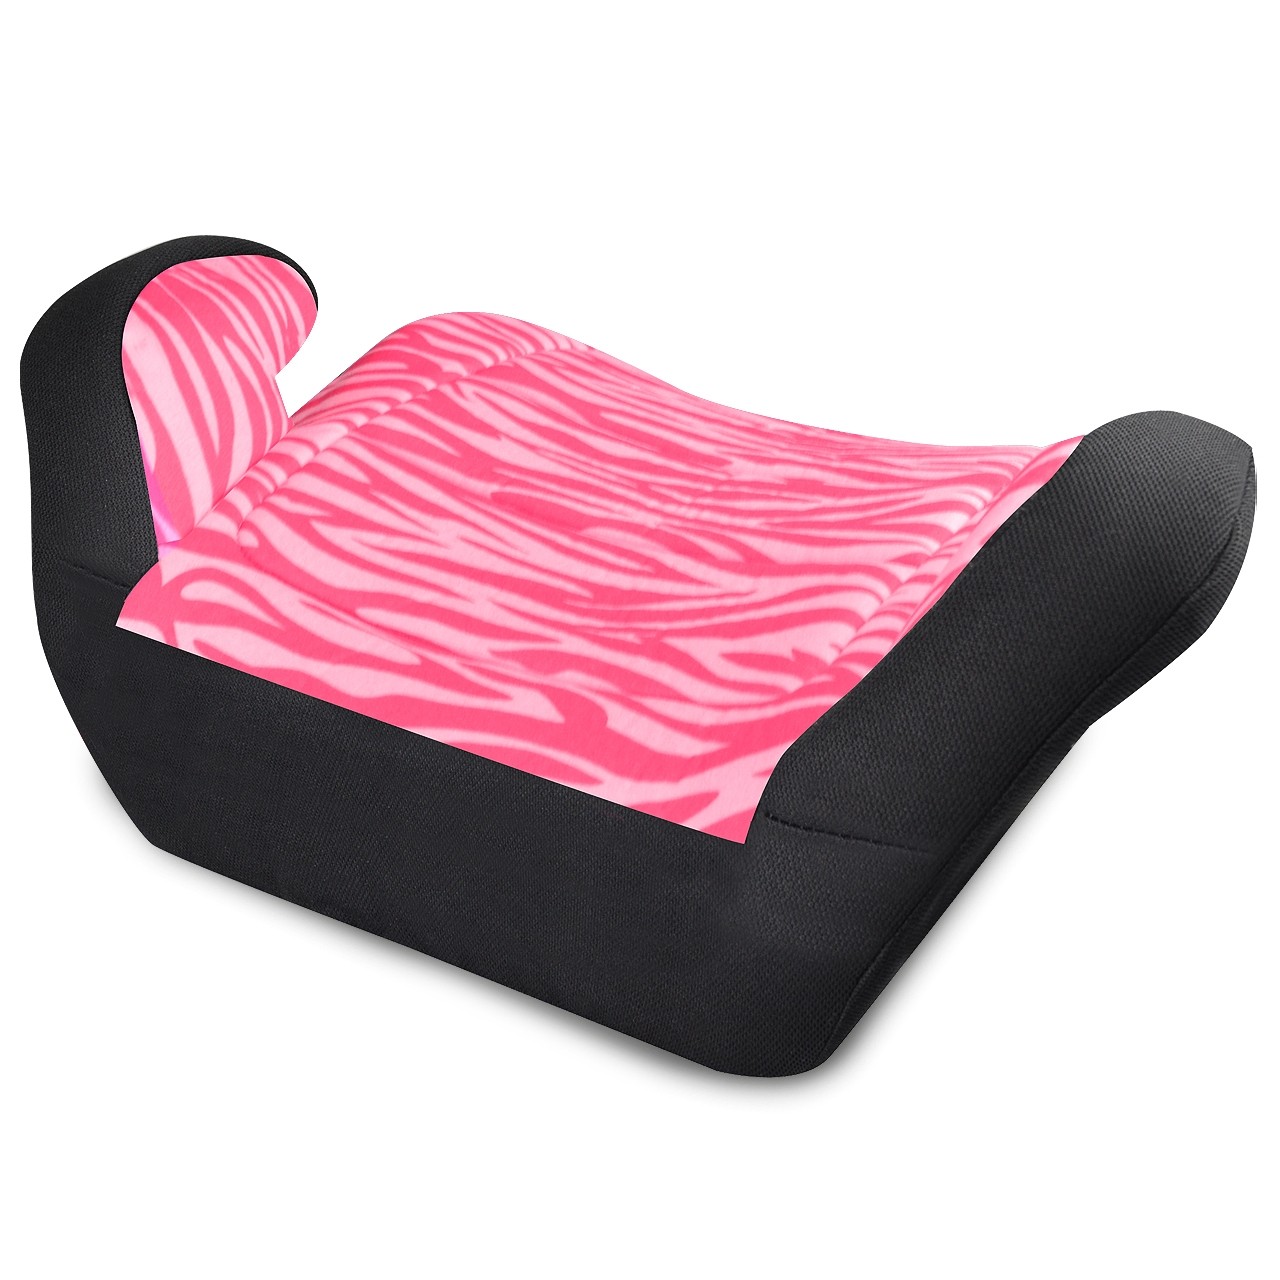 Youth Booster Car Seat - Pink Zebra